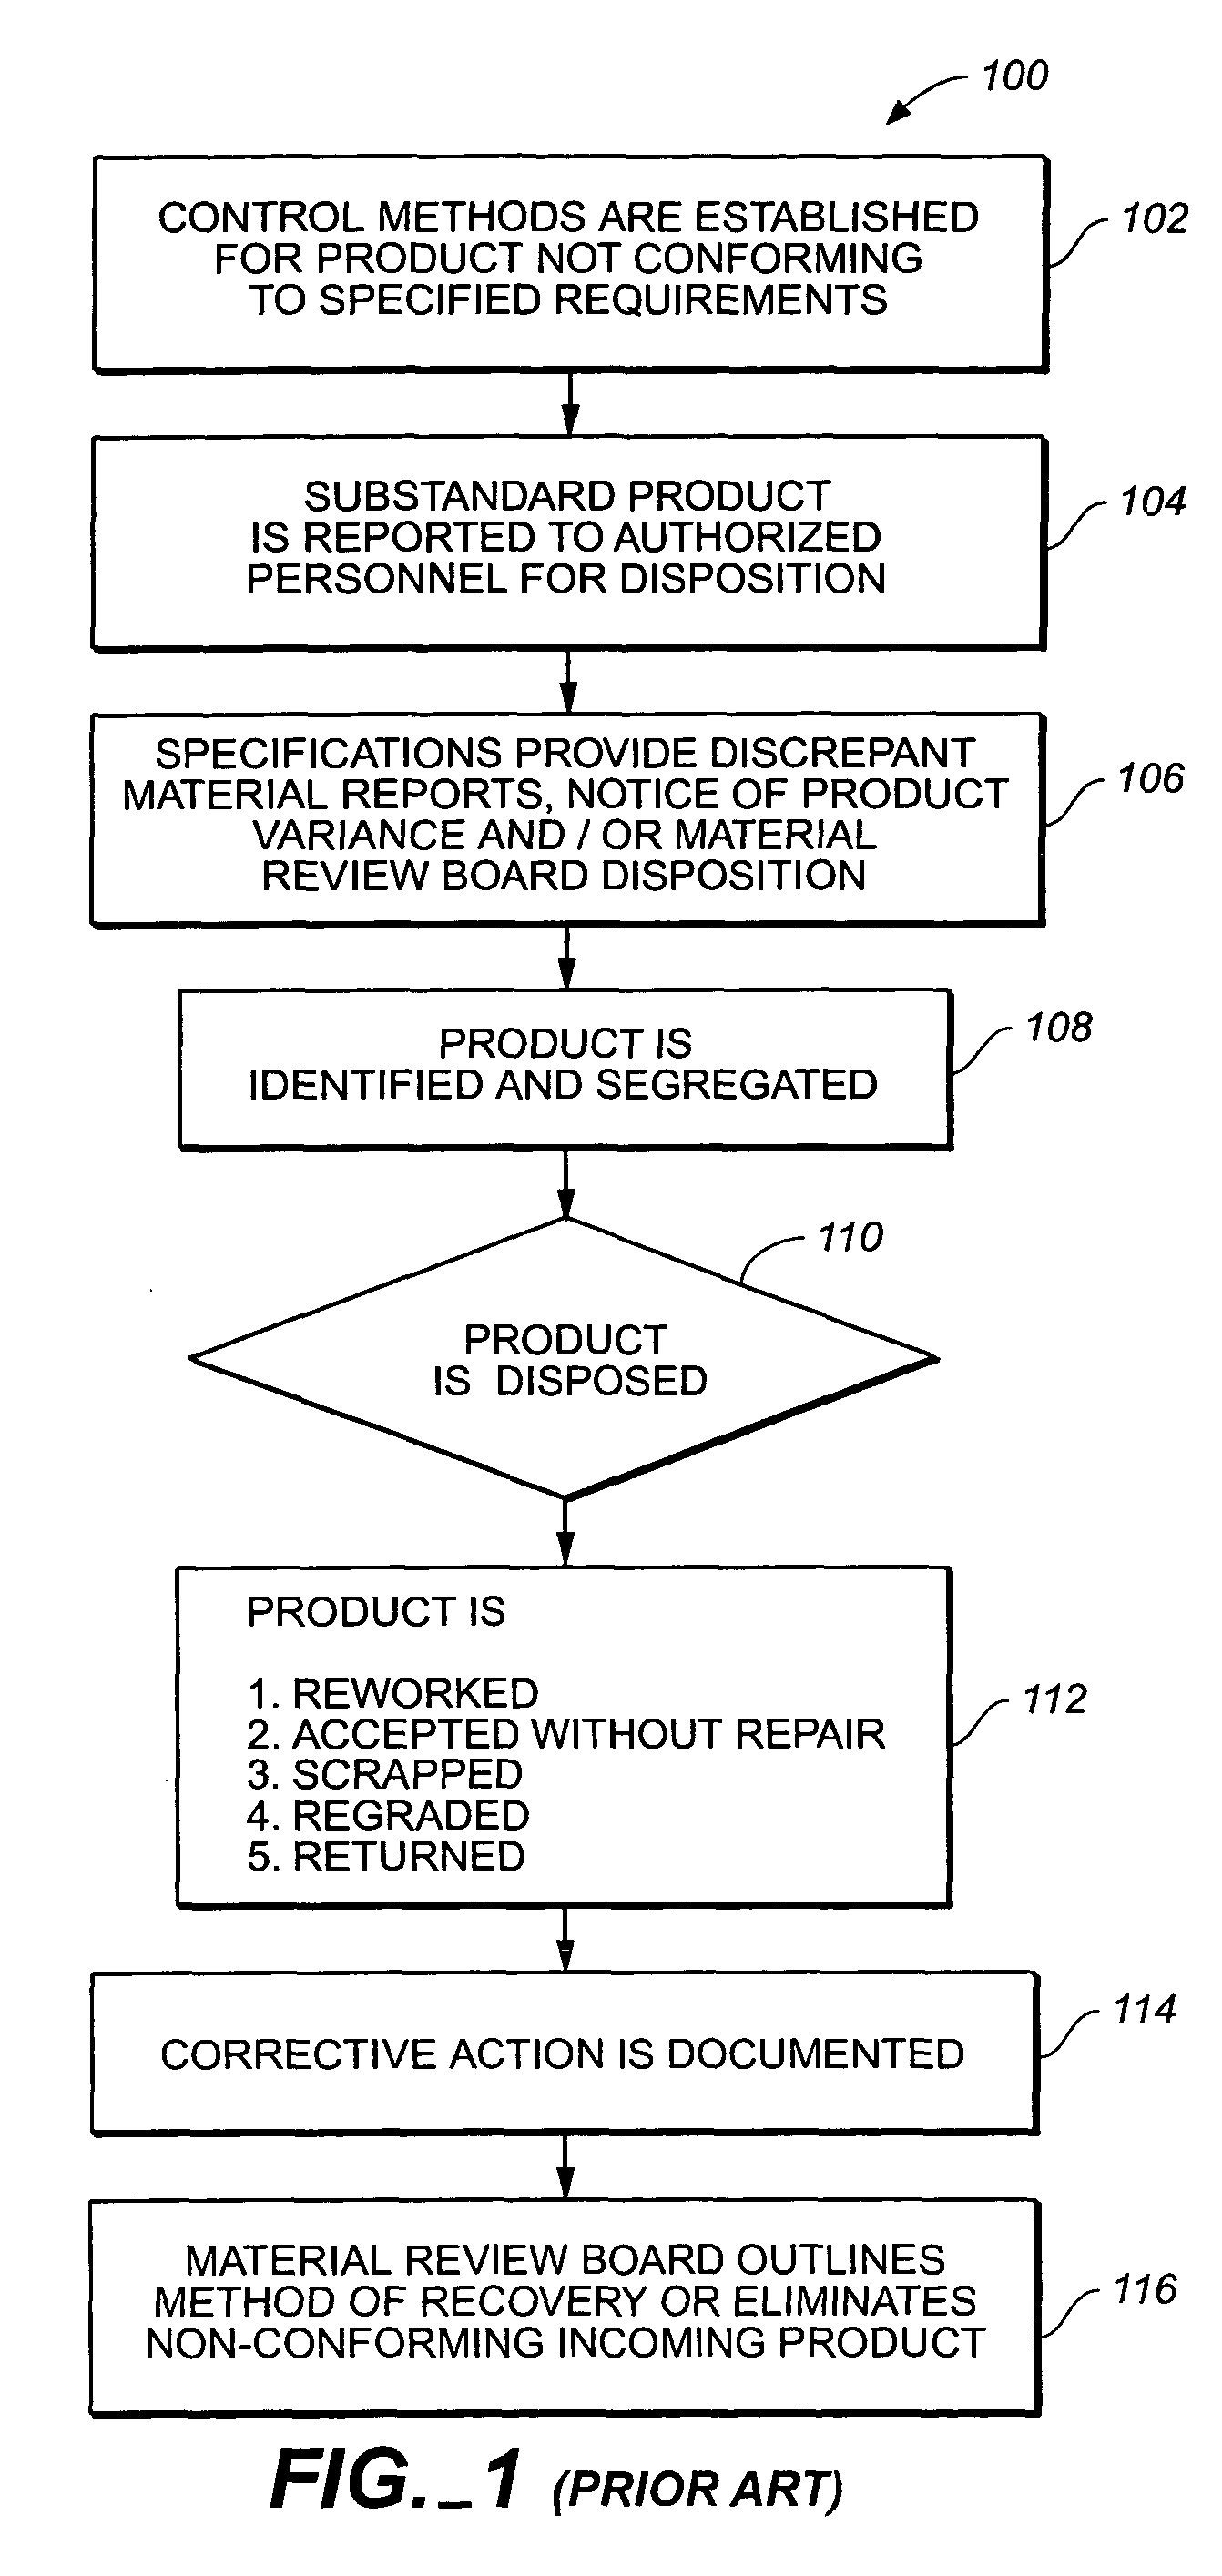 Method and apparatus for integrating Six Sigma methodology into inspection receiving process of outsourced subassemblies, parts, and materials: acceptance, rejection, trending, tracking and closed loop corrective action